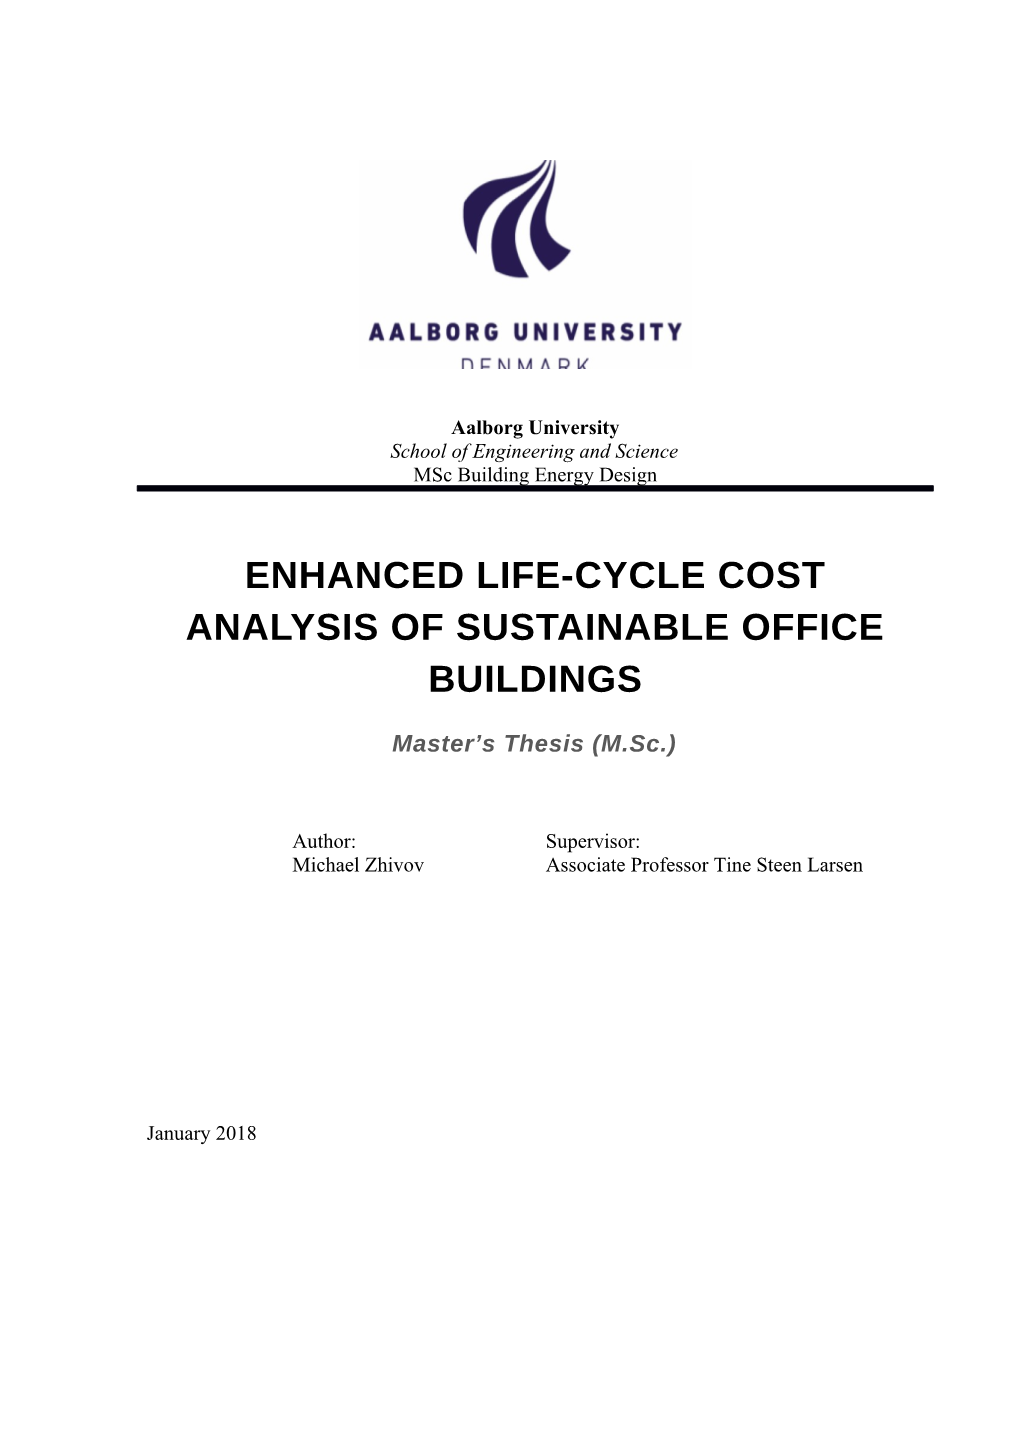 Enhanced Life-Cycle Analysis of Sustainable Office Buildings